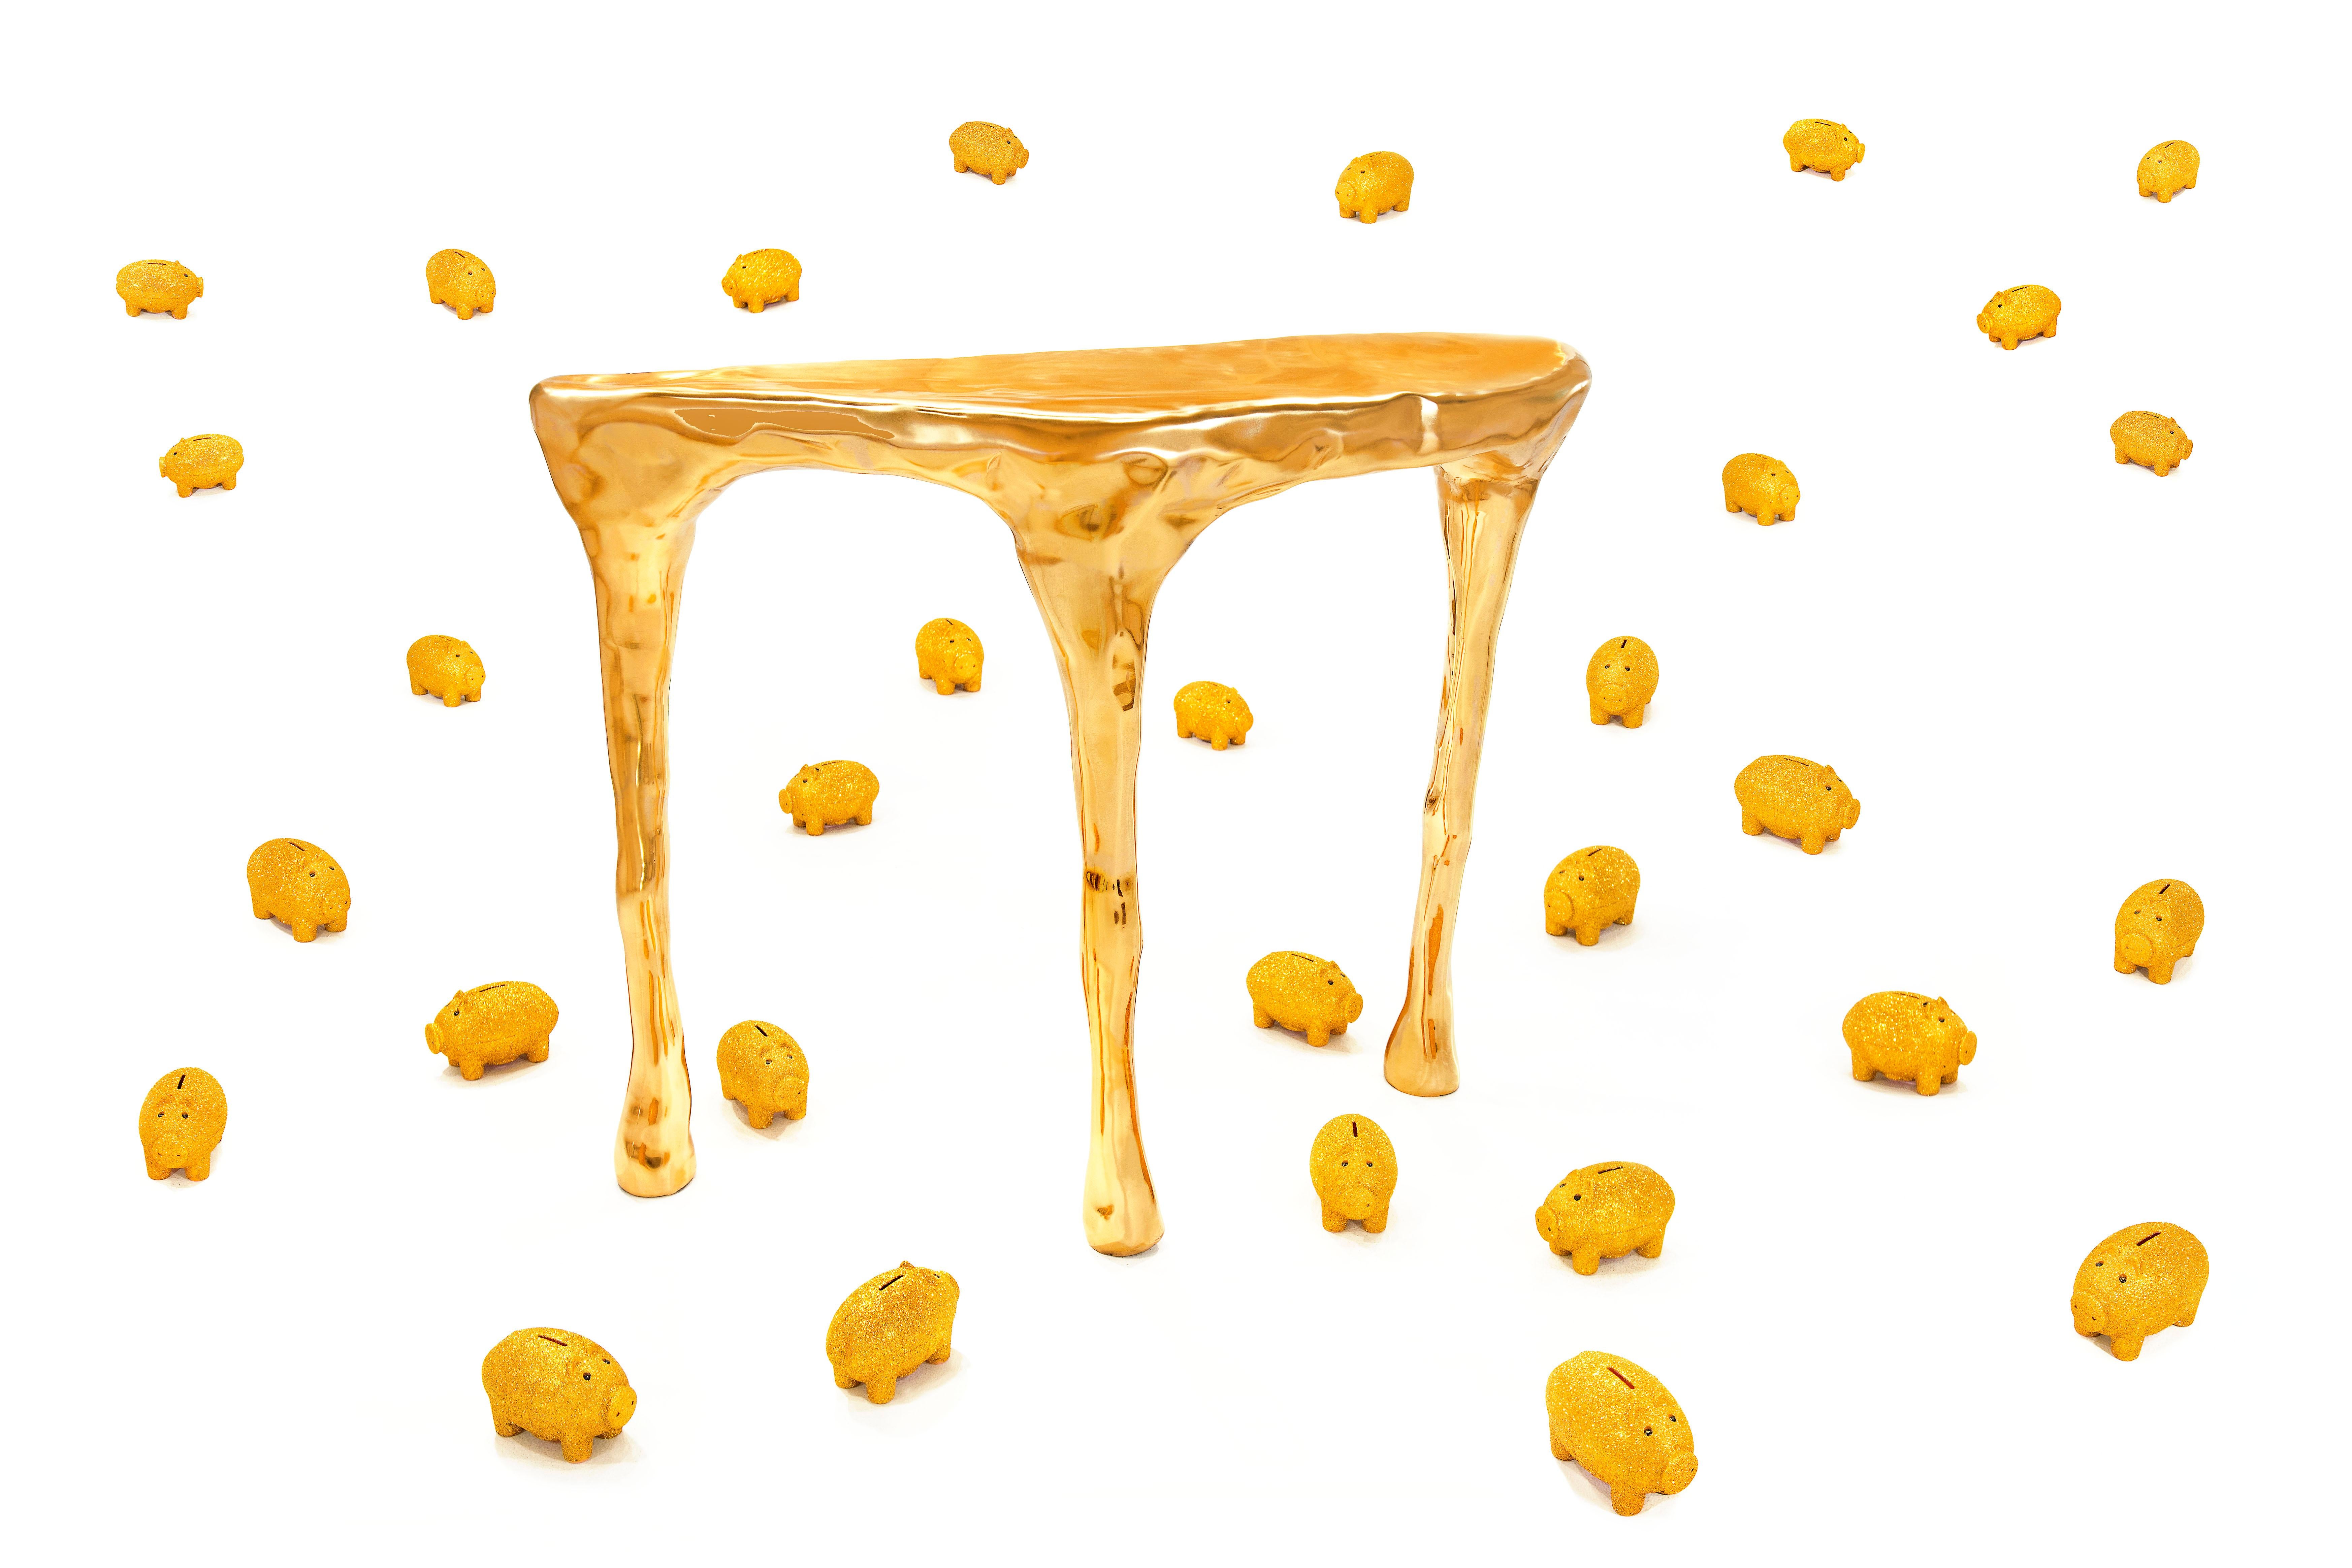 Bliss Console in Brass by Scarlet Splendour is a console table with versatile functionality. Its rich texture and color combine traditional techniques in pure brass with contemporary amorphous sculpting.

The Fools' Gold Collection of amorphous